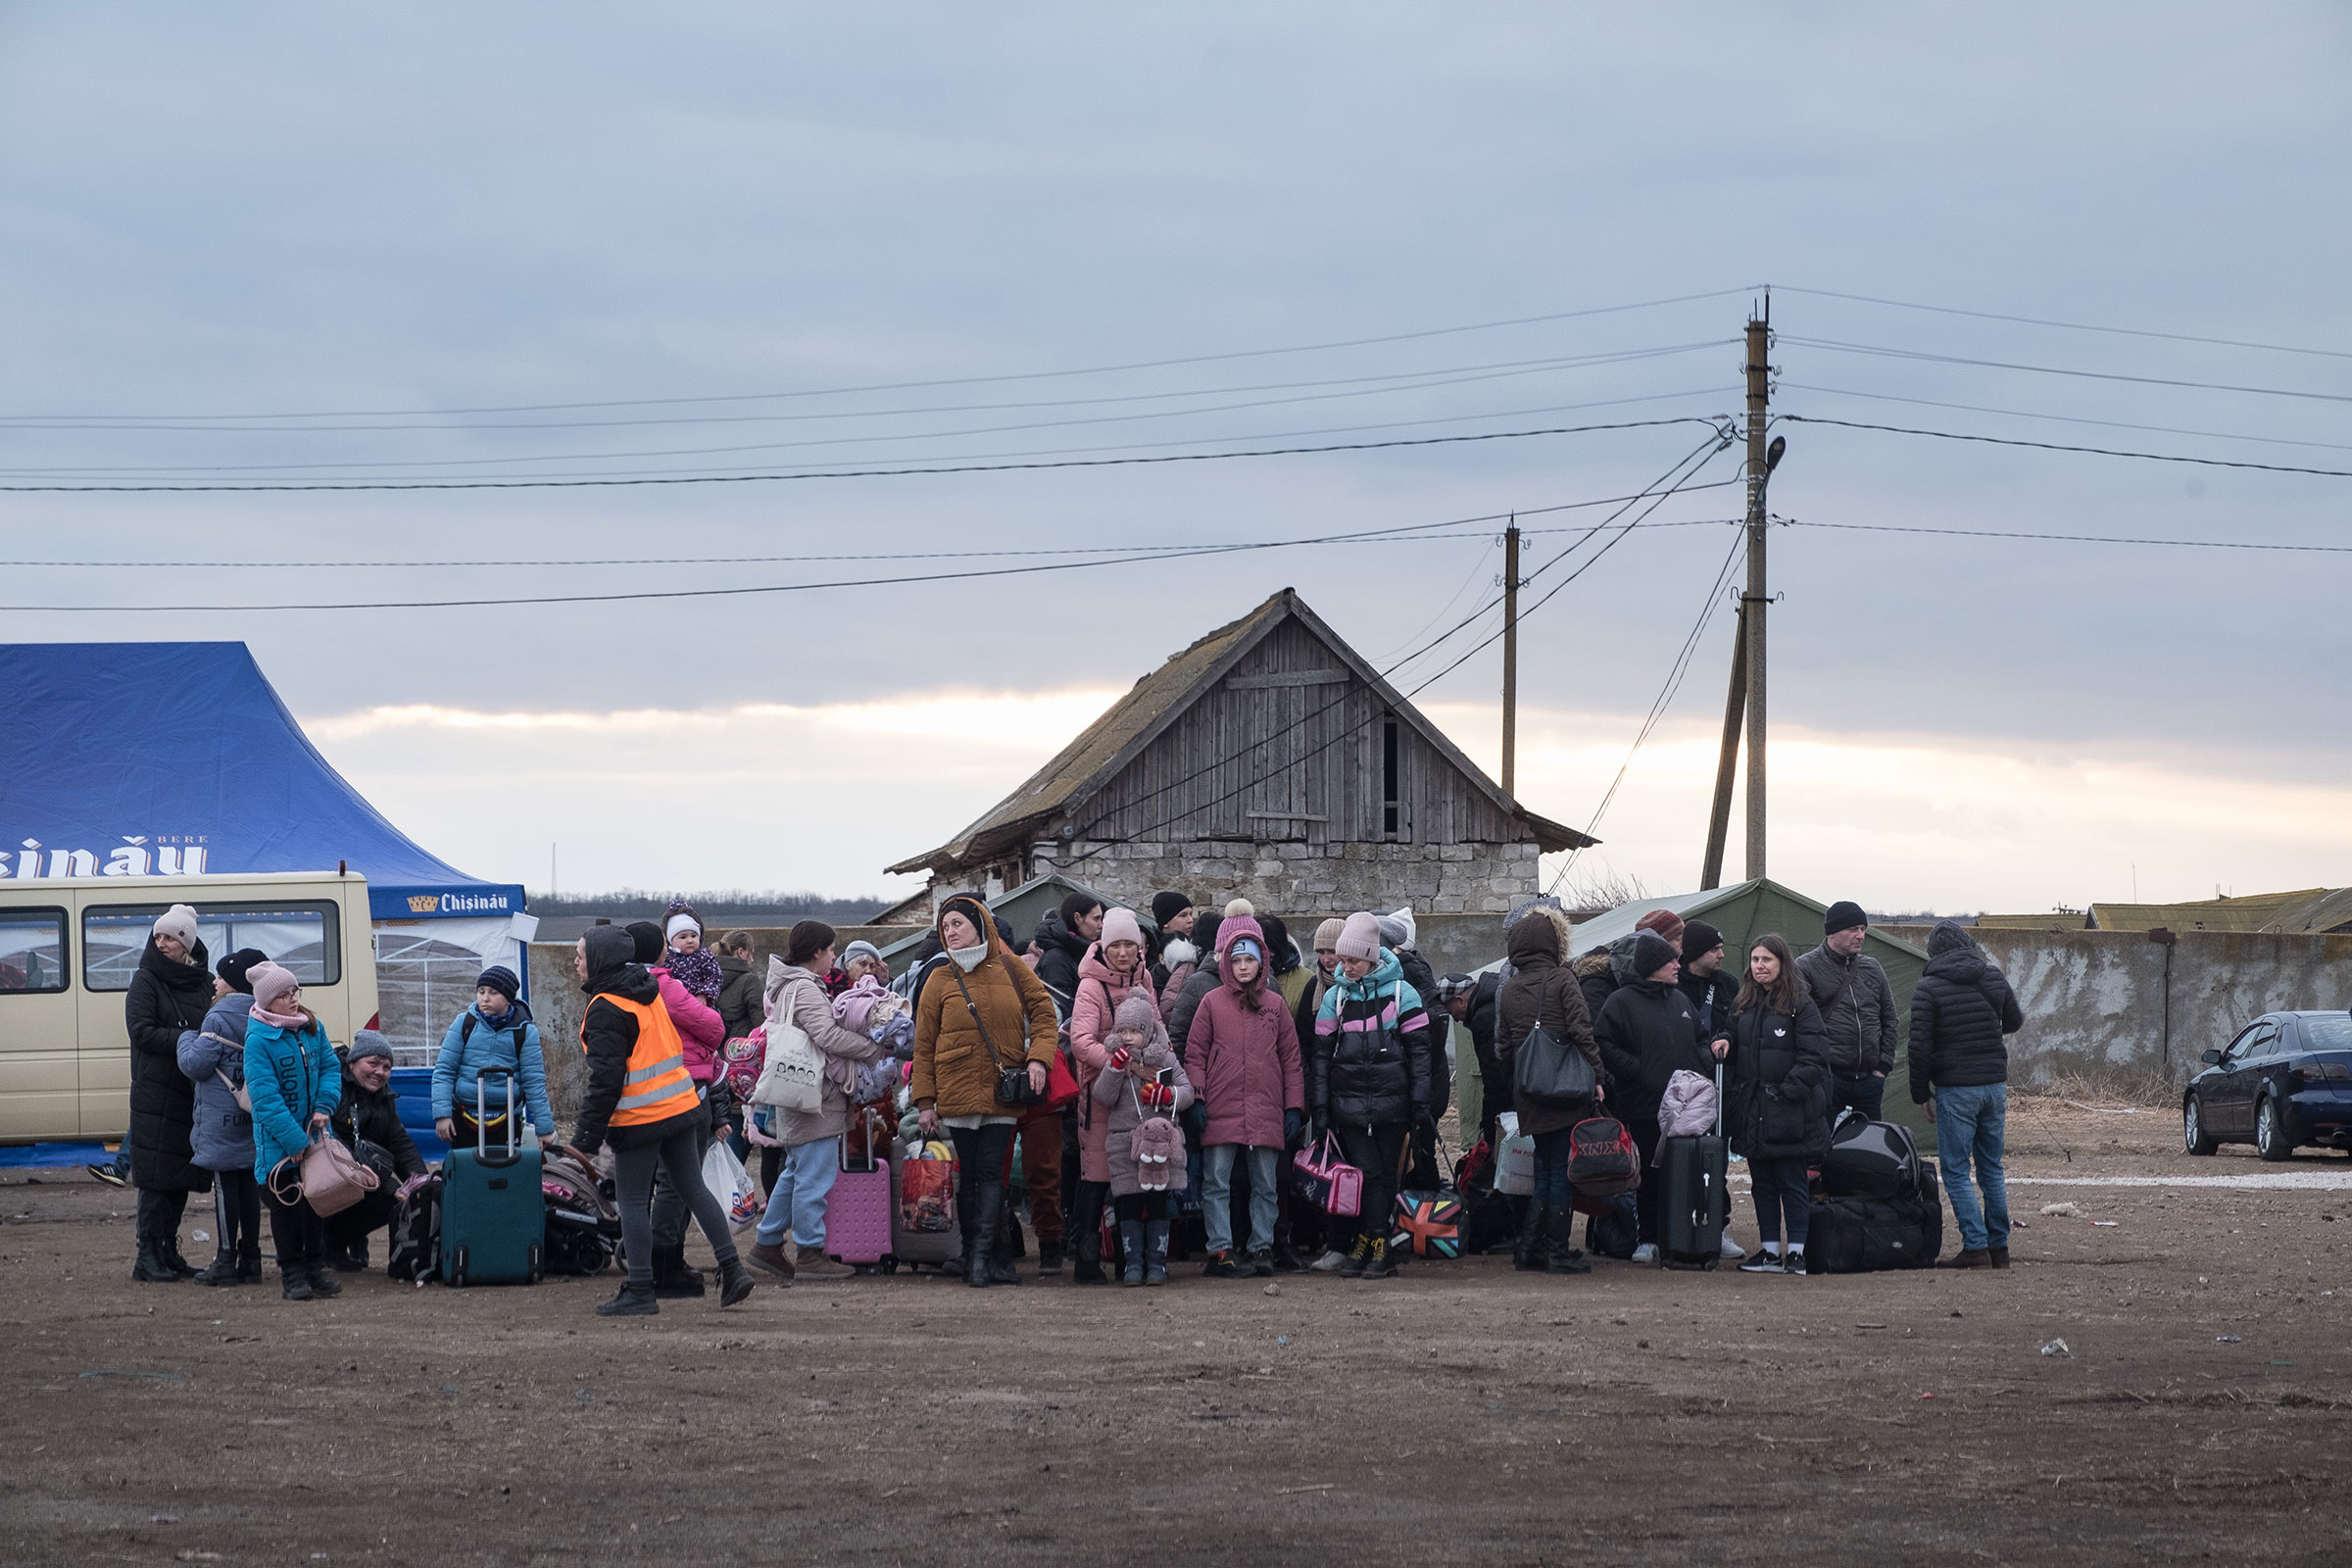 A group of refugees at the border of Palanca between Ukraine and Moldova, on March 6, 2022 (Sidney Lea Le Bour—Hans Lucas/Reuters)